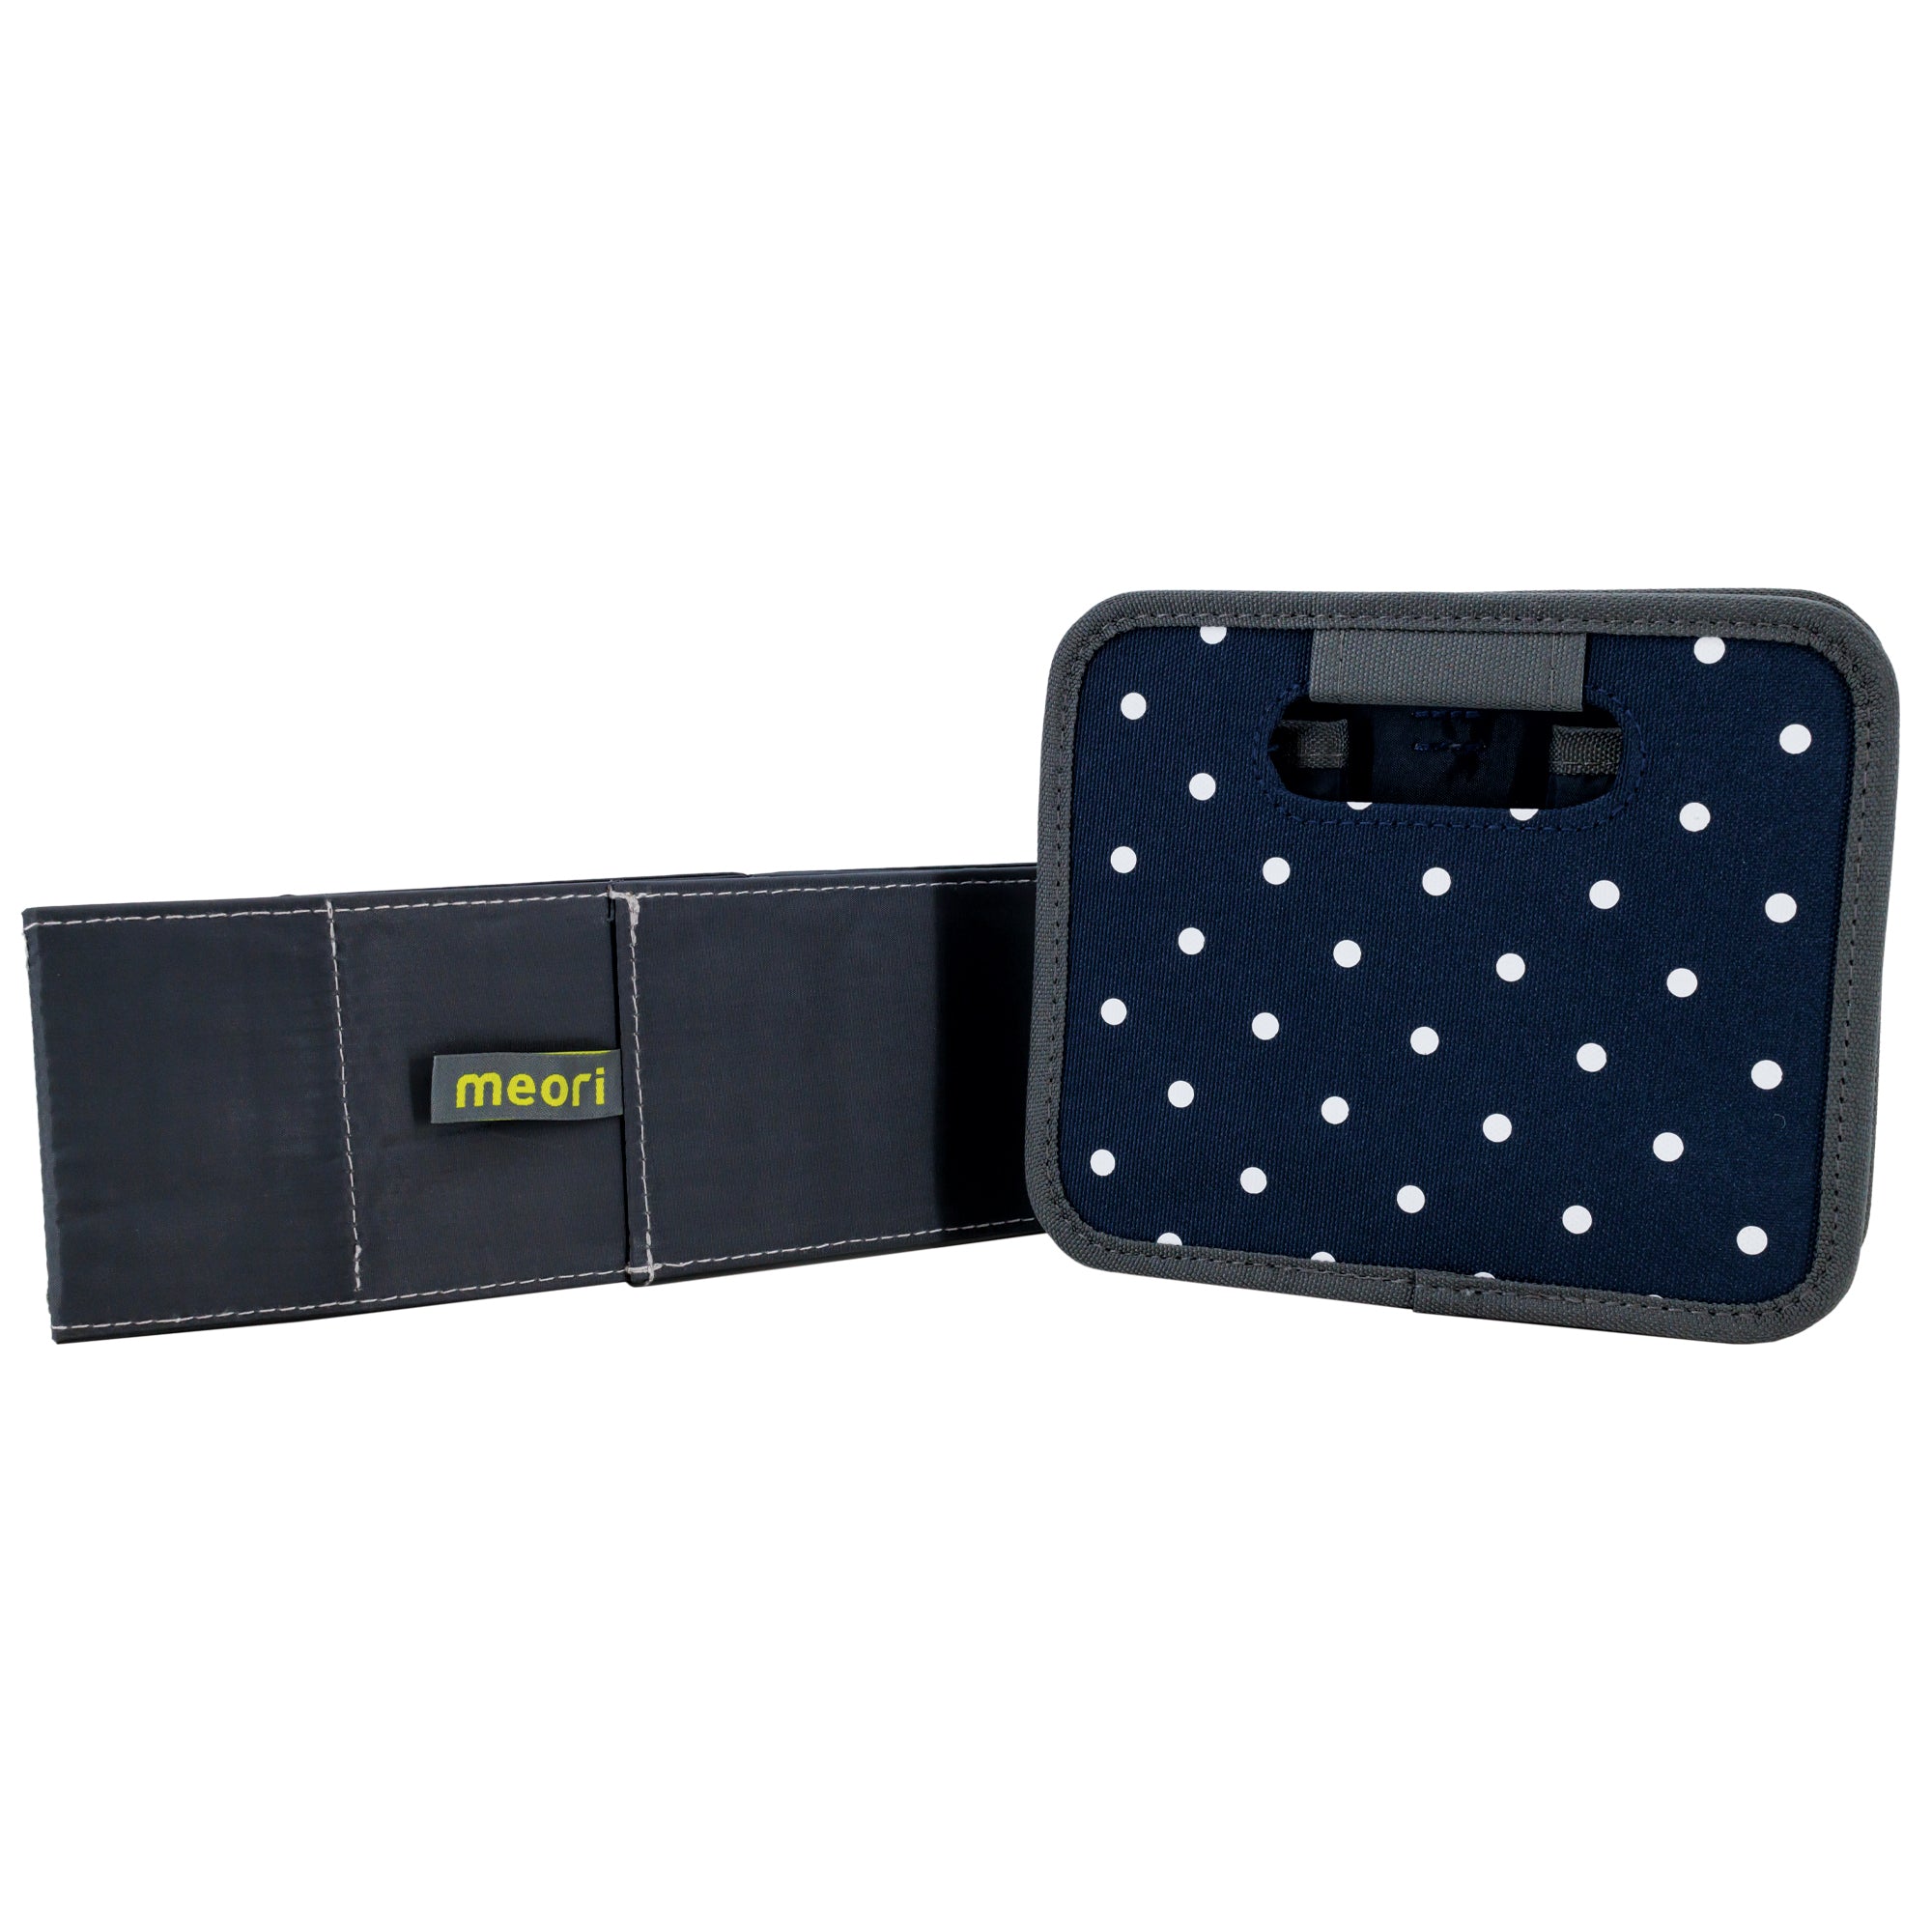 Navy blue with white polka dots colored Meori storage box, folded flat. Navy blue insert propped up against Meori box, also folded flat.